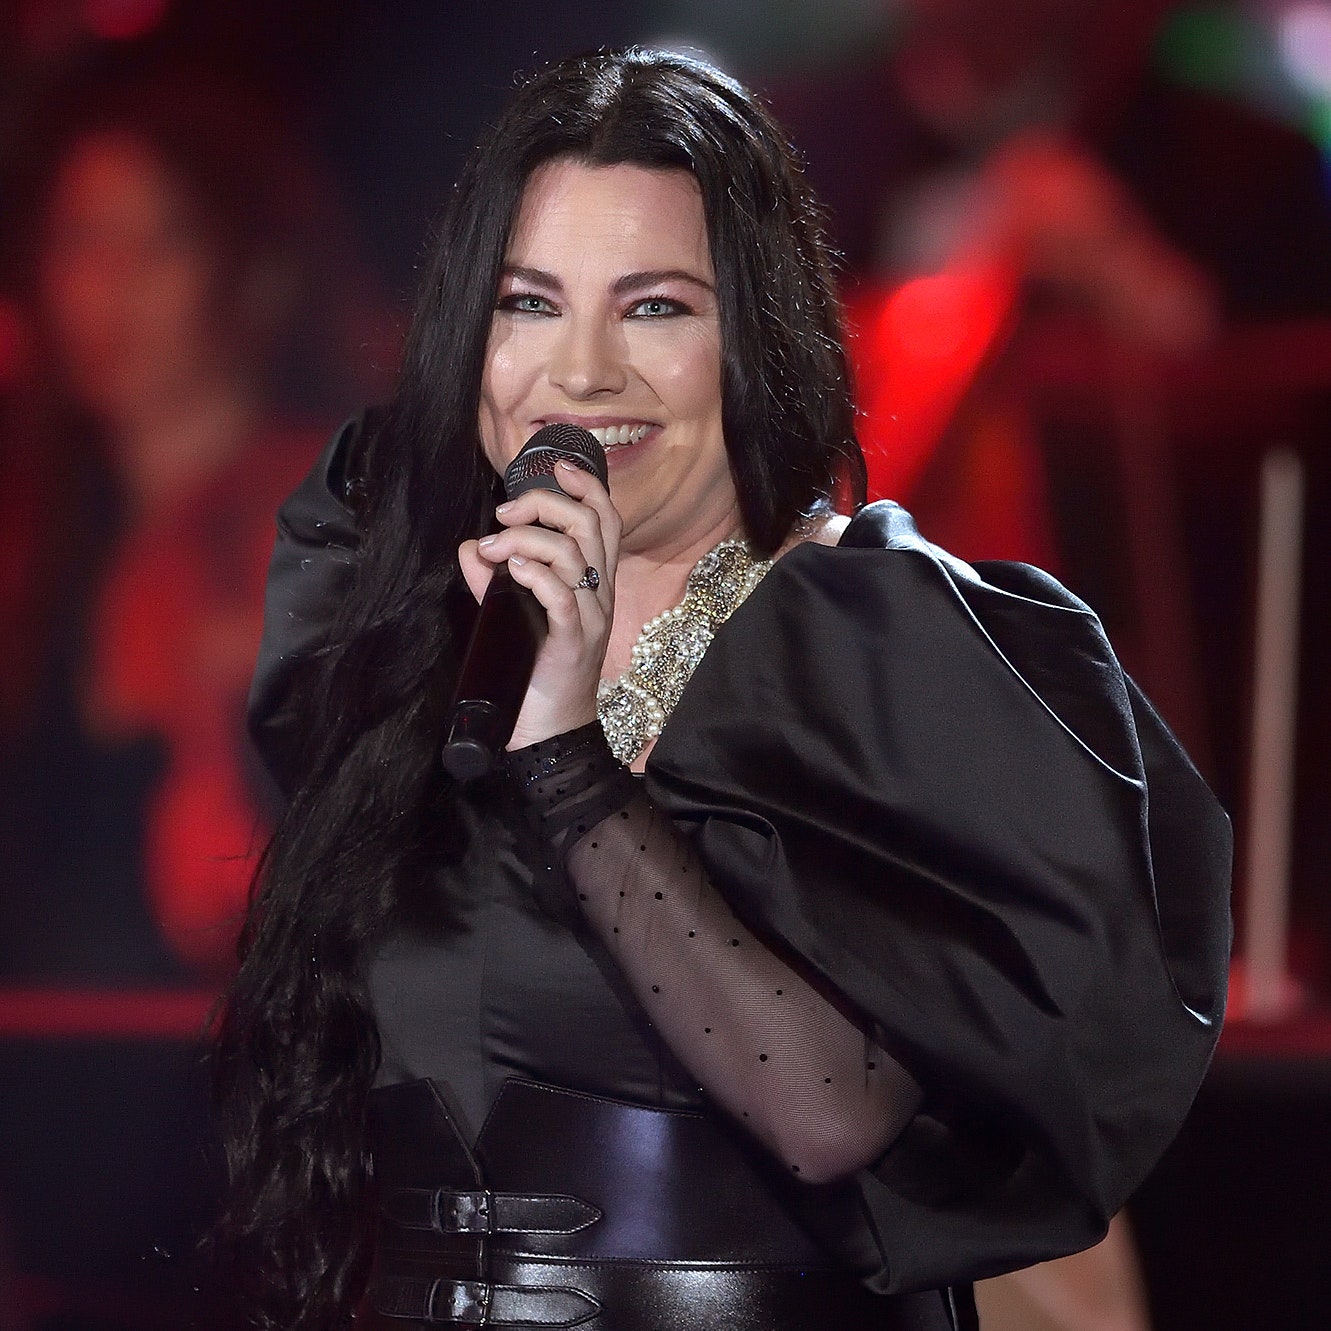 Evanescence’s Amy Lee on 20 Years Since Fallen, One of Best-Selling Albums of the 21st Century